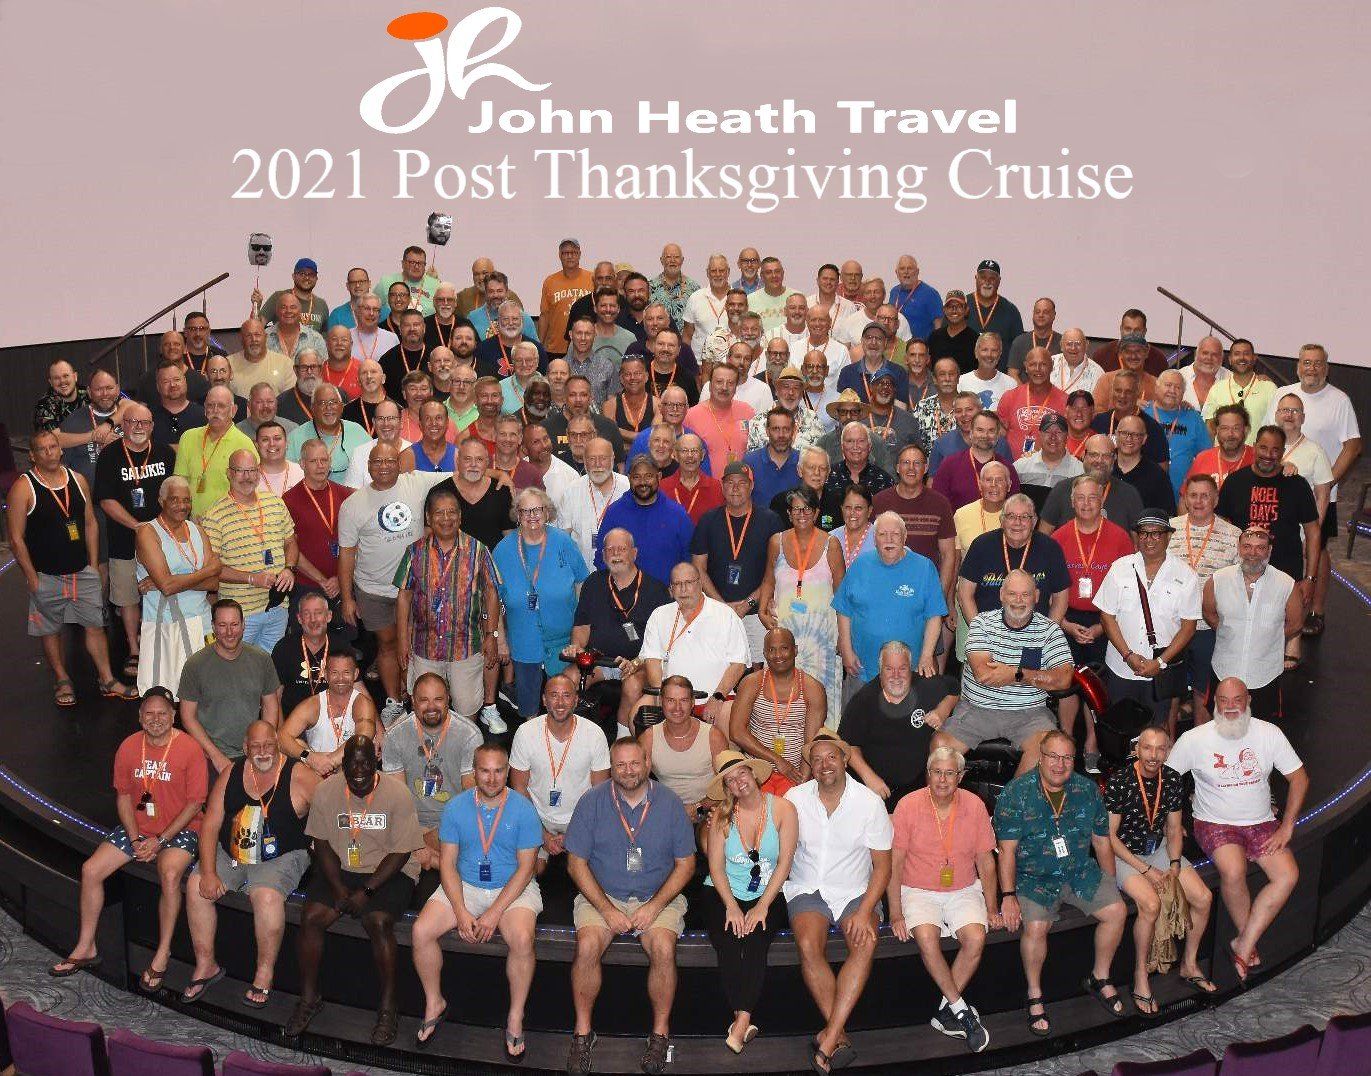 A large group of people are posing for a picture for jr john heath travel 's 2021 post thanksgiving cruise